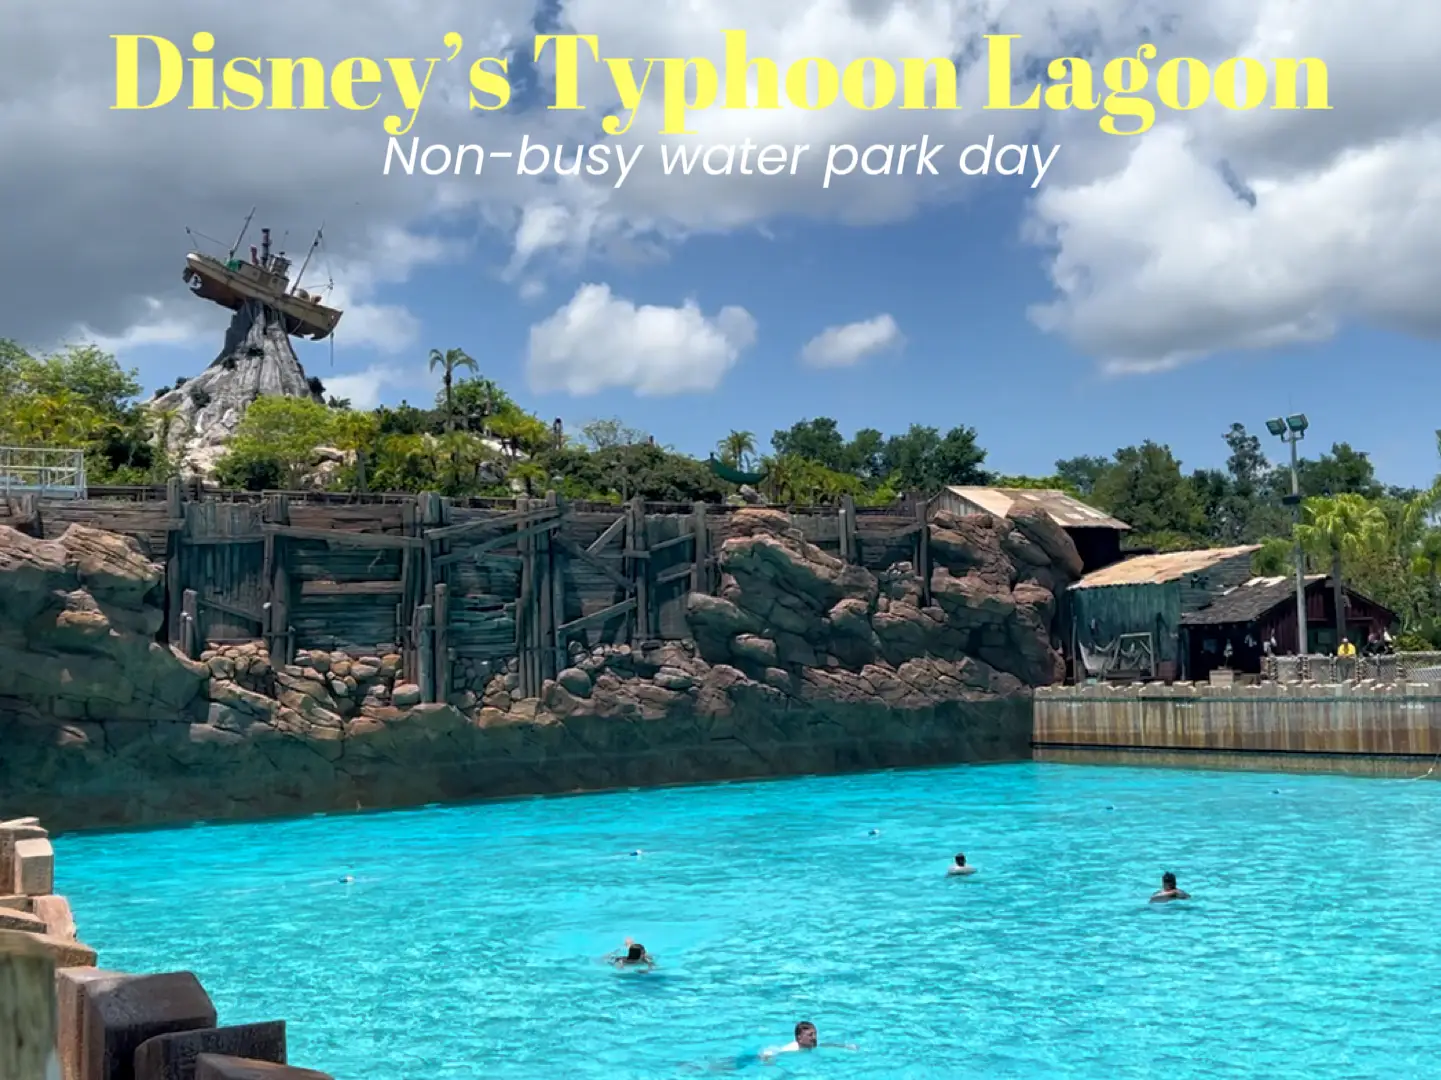 Non-busy day at Disney’s Typhoon Lagoon Water Park